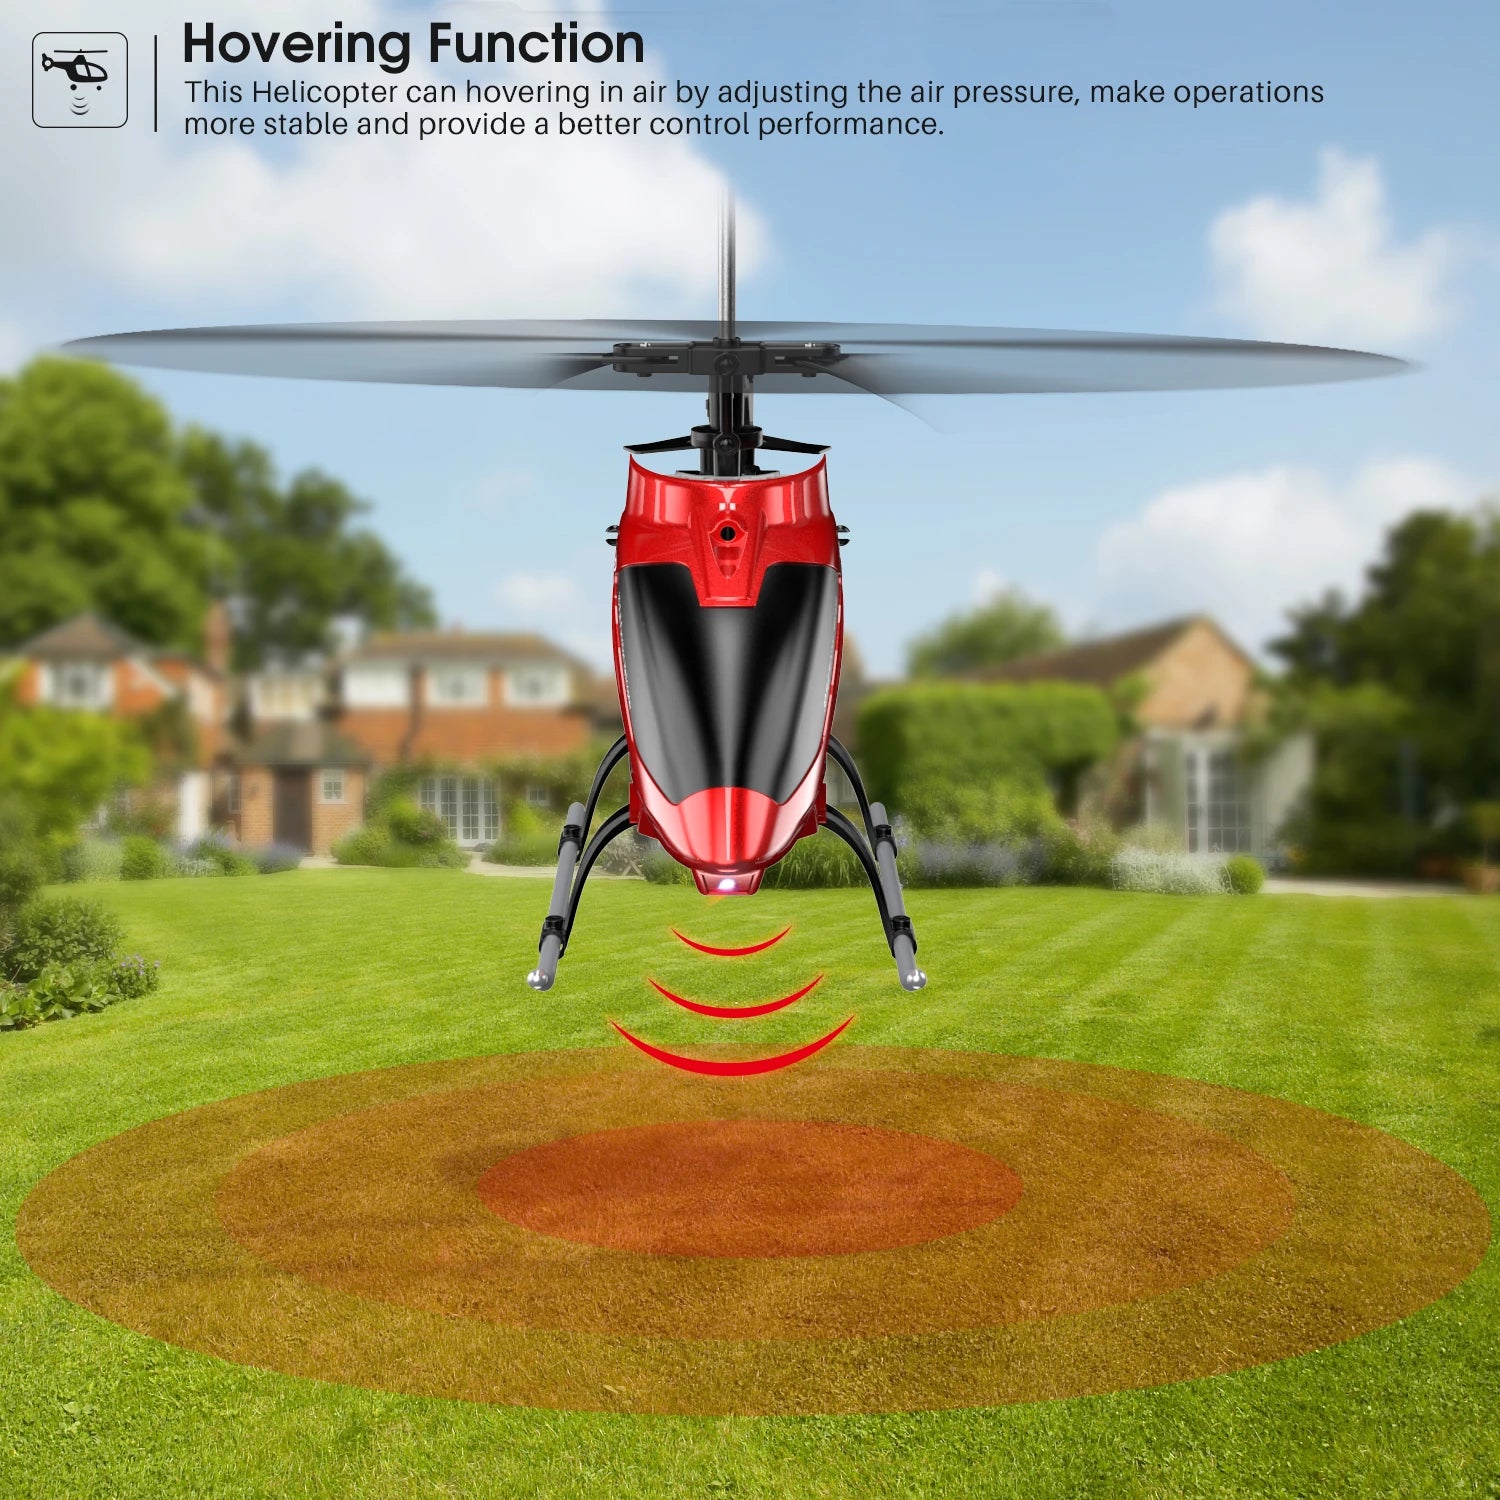 SYMA RC Helicopter, Hovering Function This Helicopter can hover in air by adjusting the air pressure 